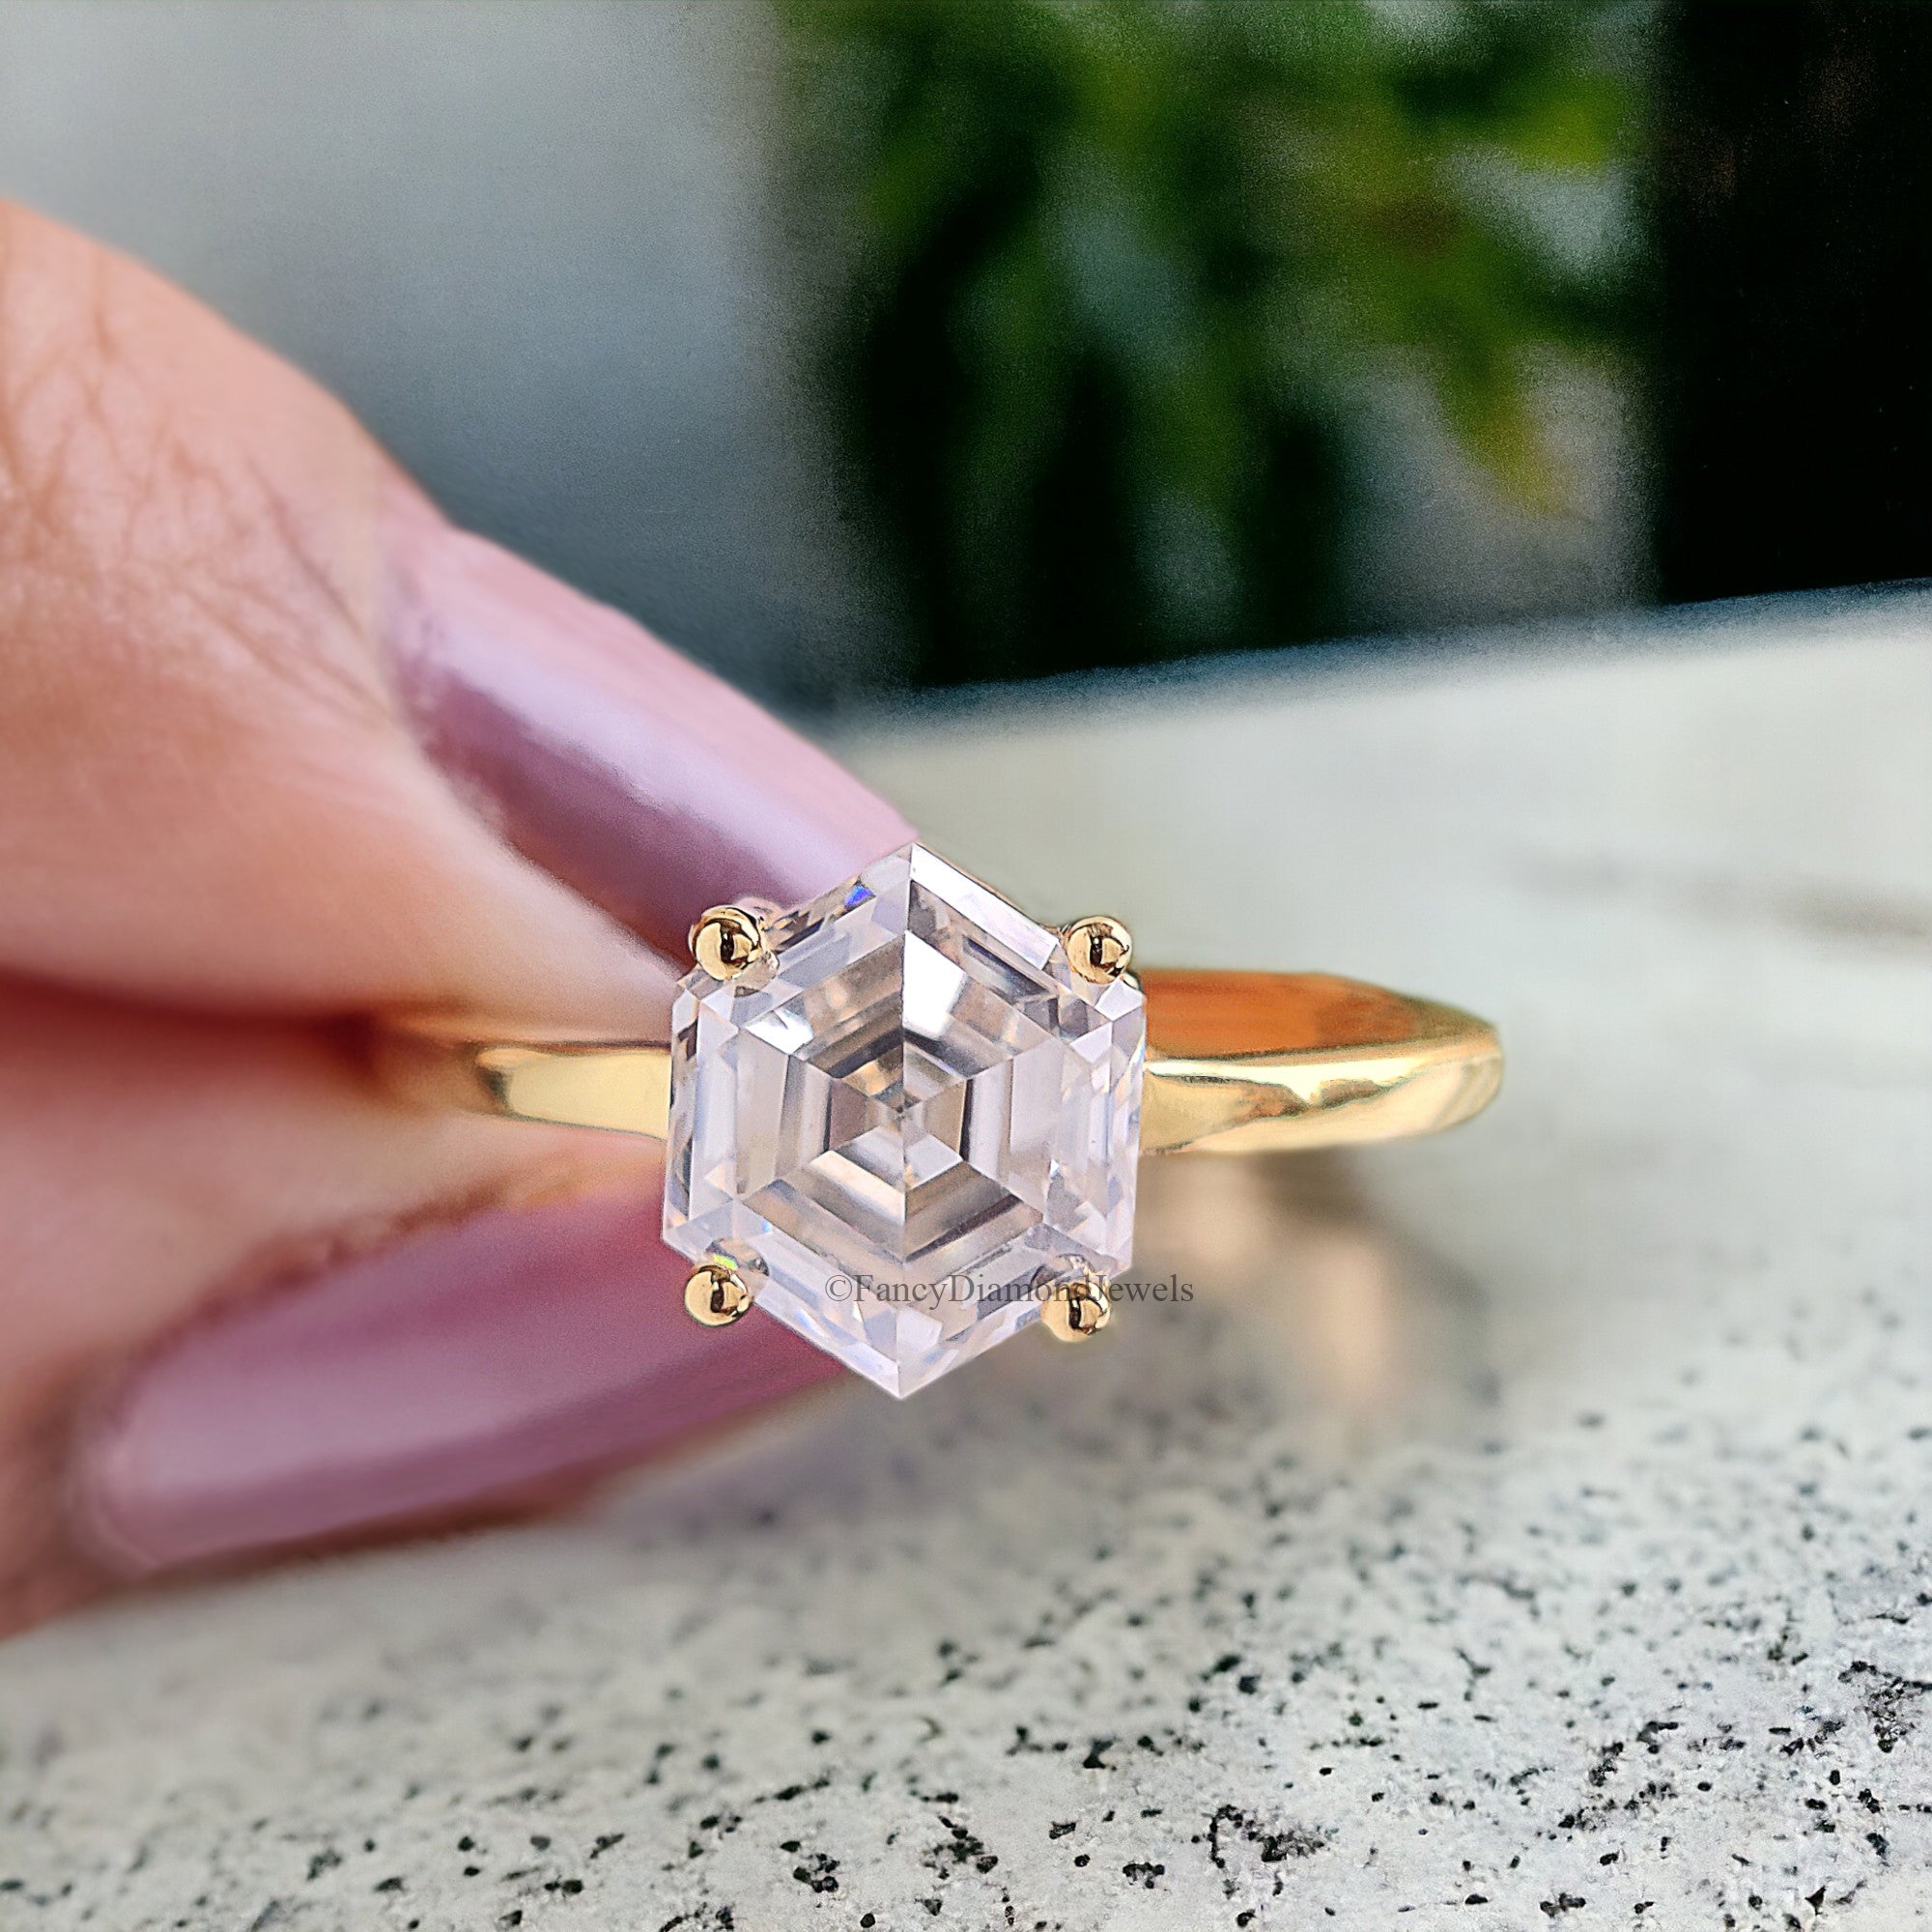 Hexagon Moissanite Bridal Ring Colorless Moissanite Wedding Ring Solid Gold Anniversary Band Solitaire Moissanite Engagement Ring Set FD165